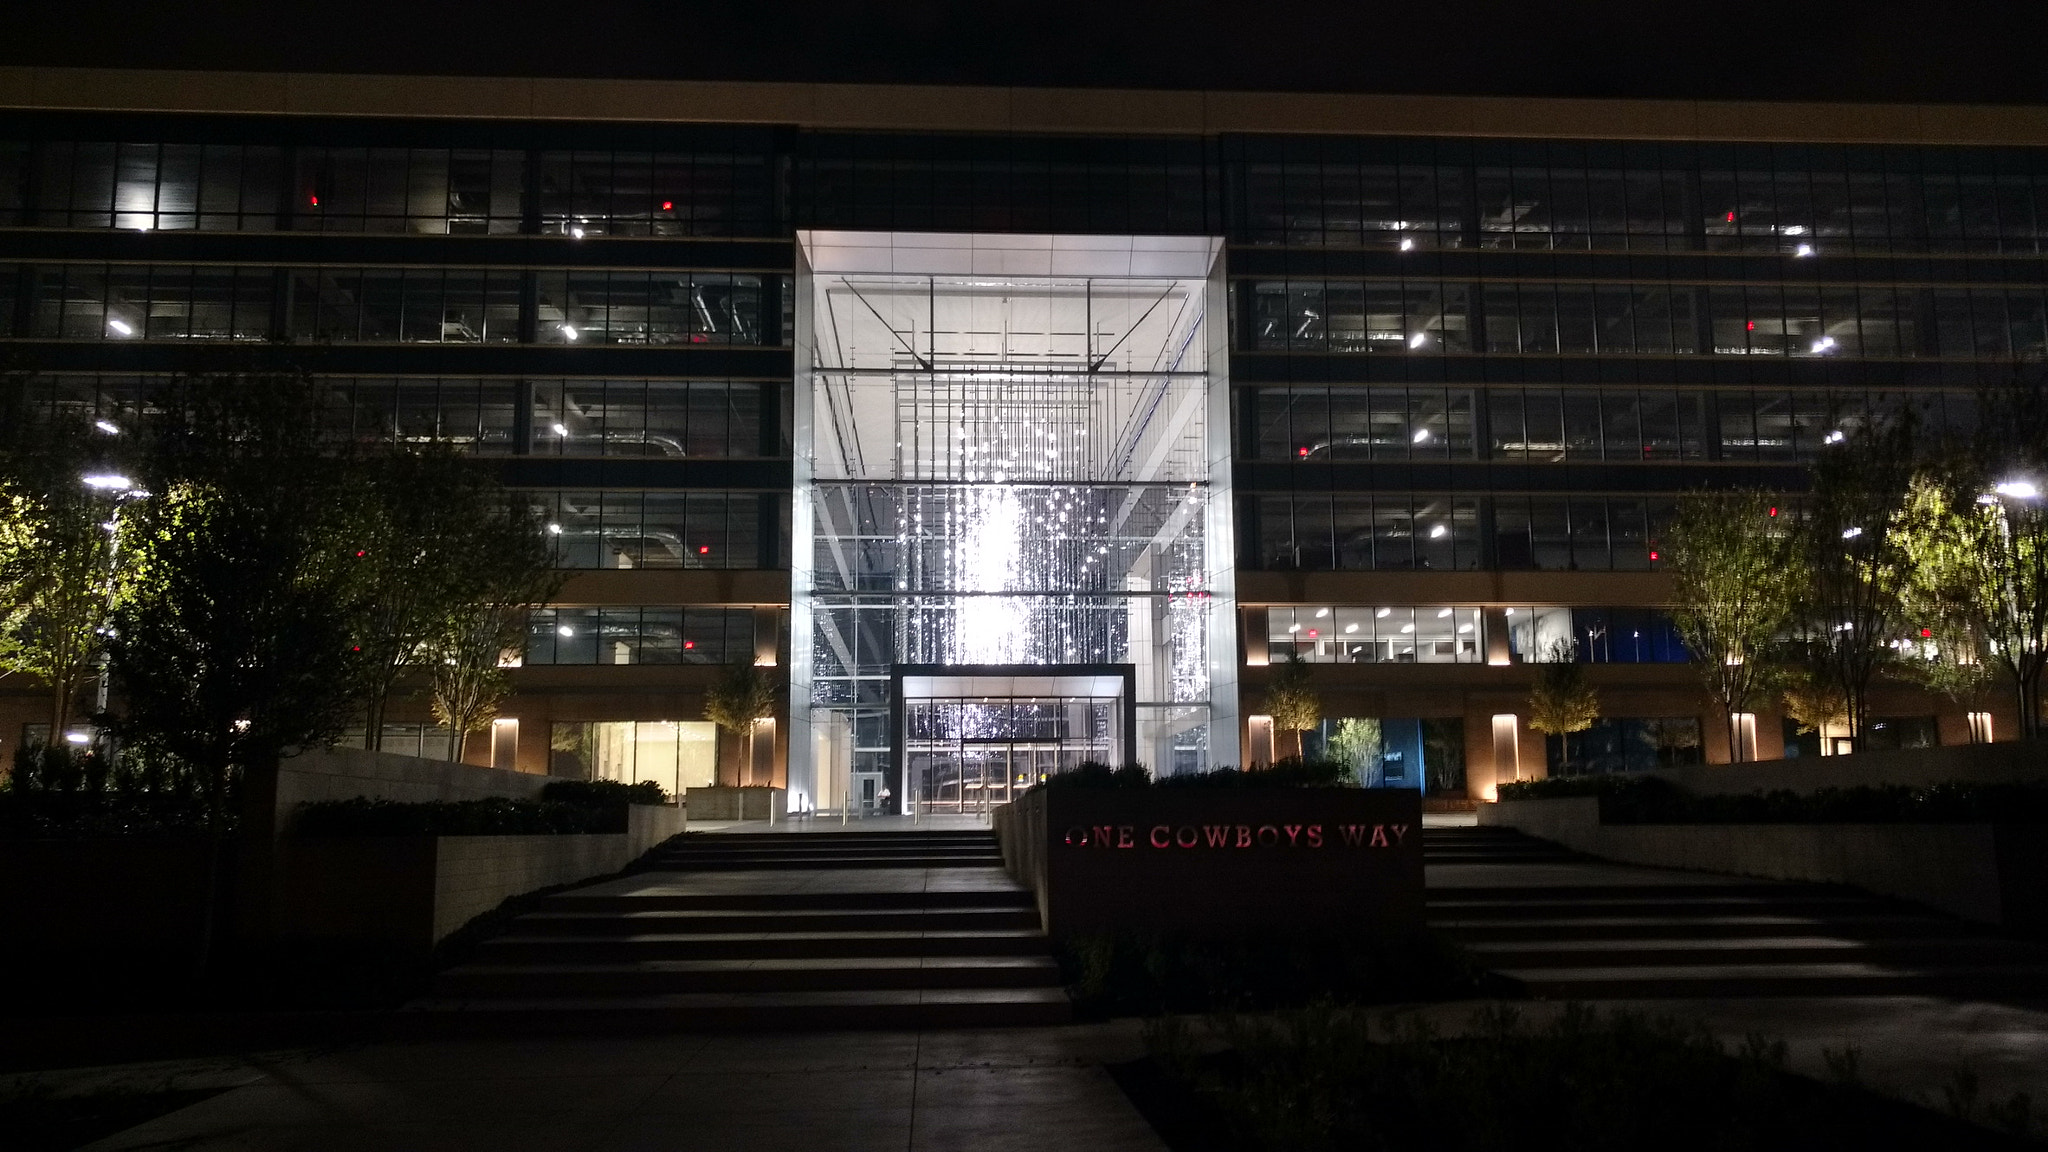 Motorola DROID MAXX 2 sample photo. Recent photos of the new dallas cowboys hq and training center! photography